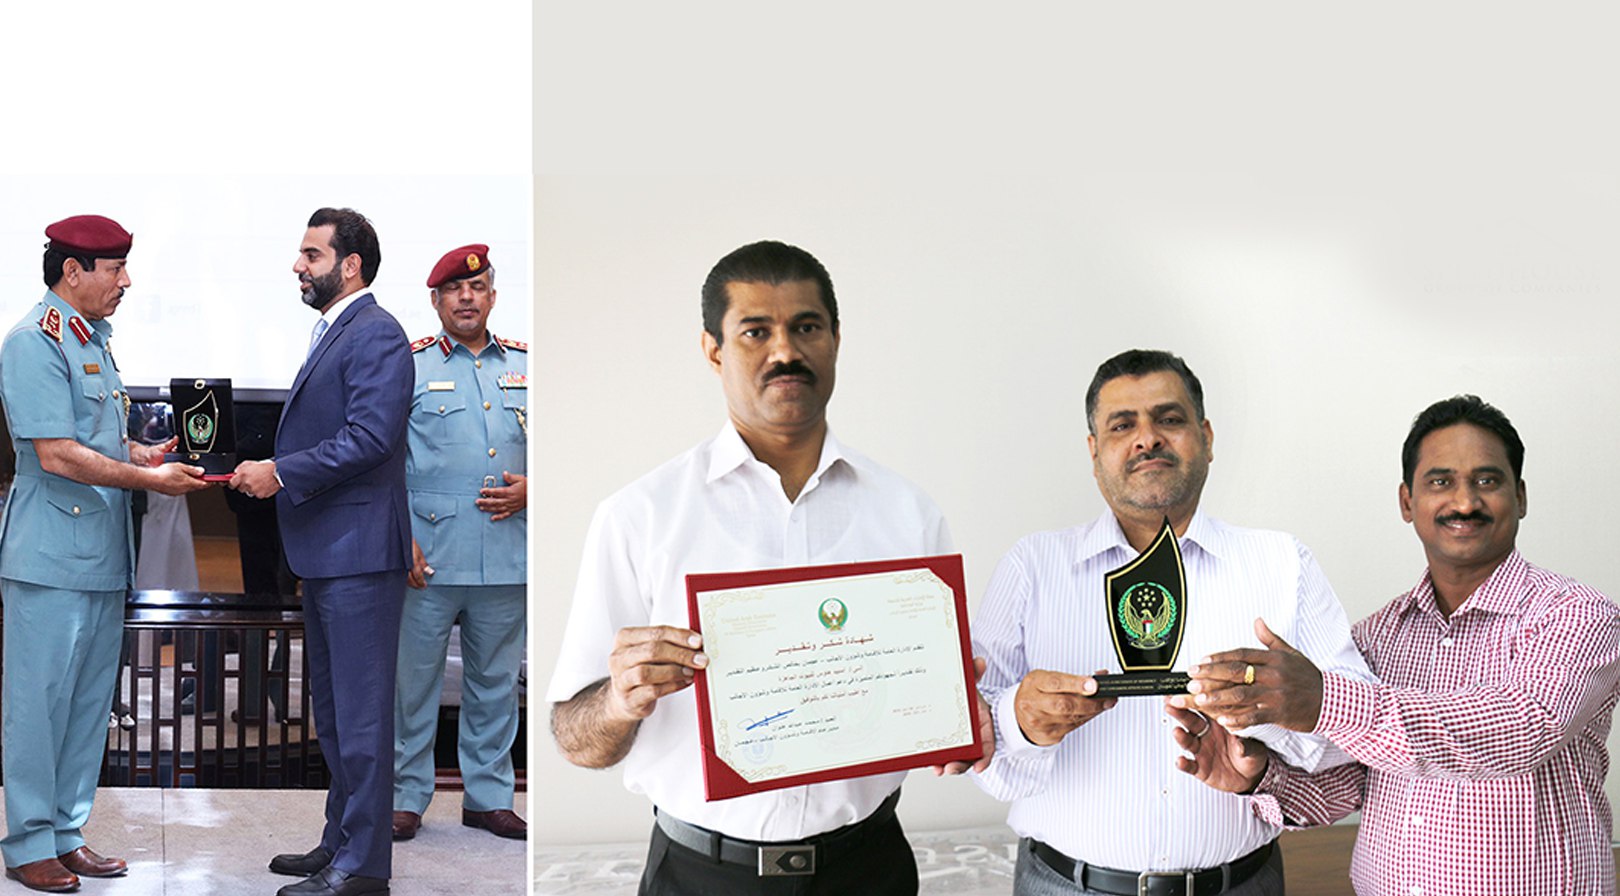 Award from the General Directorate of Residence and Foreigners Affairs